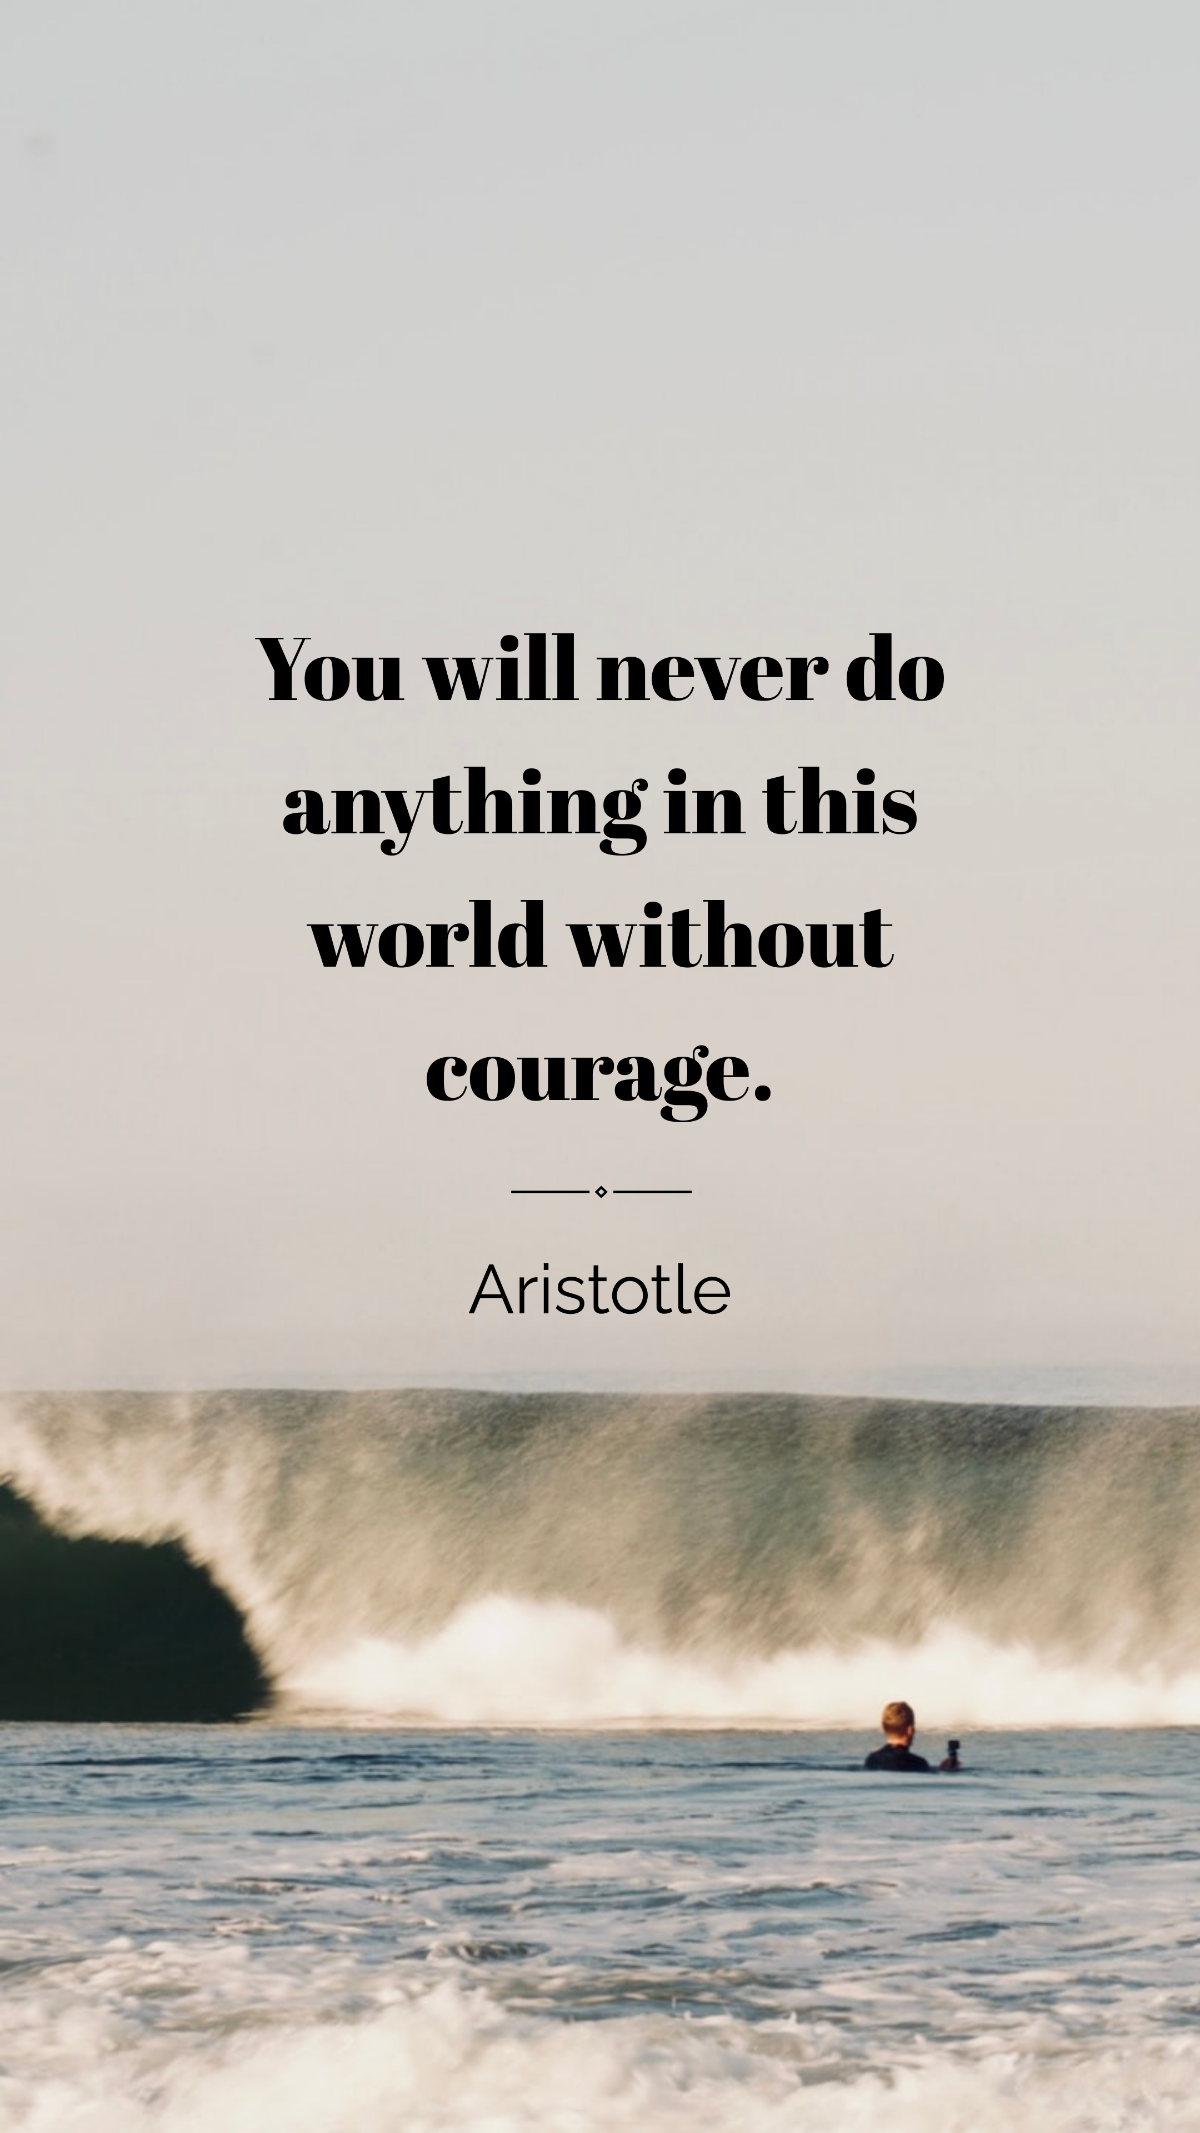 Aristotle - You will never do anything in this world without courage.